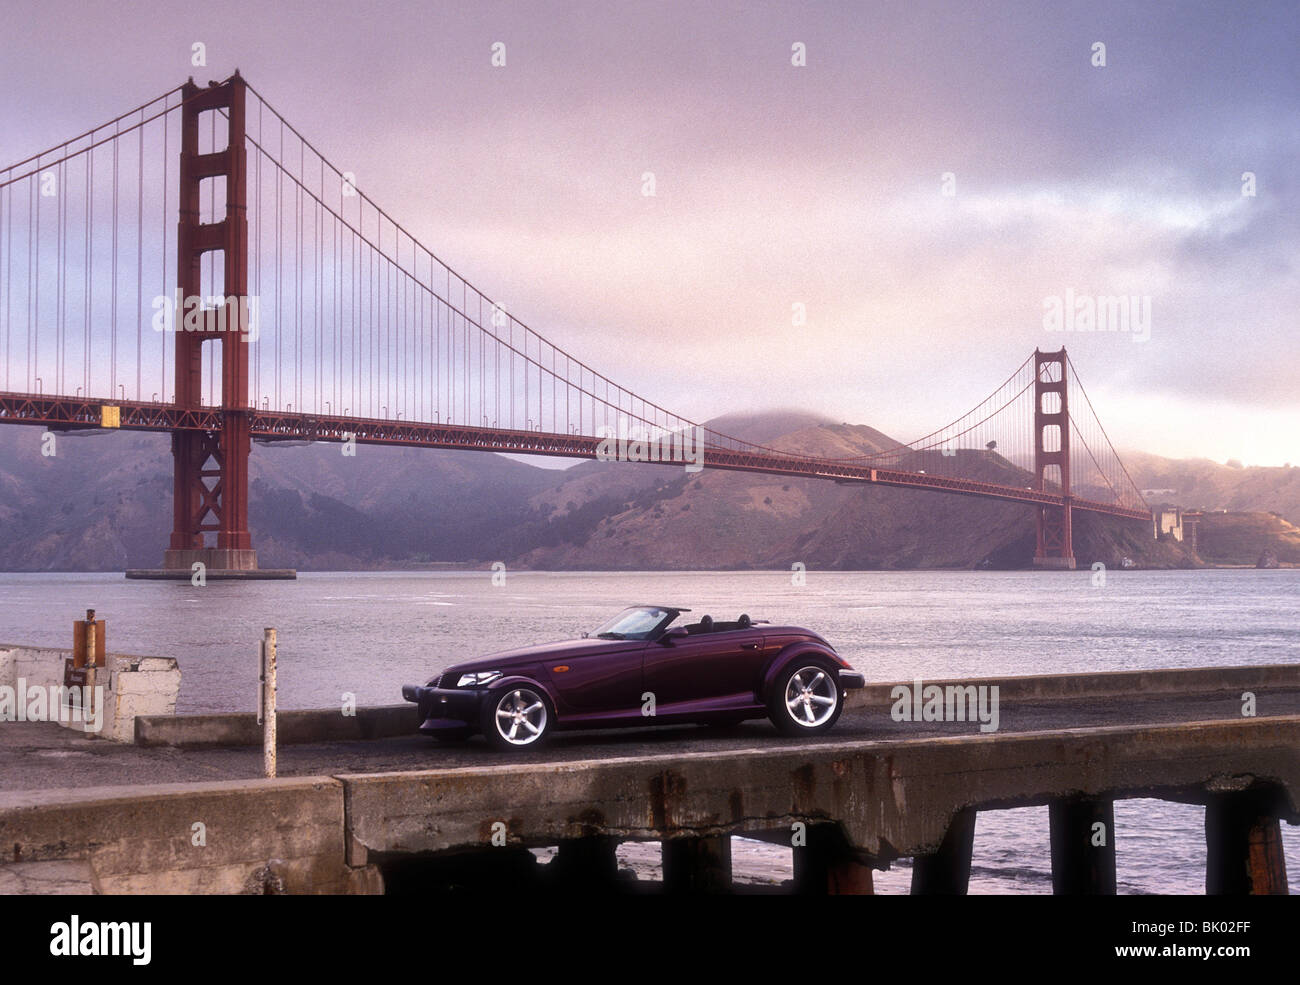 1997 Plymouth Prowler parked on a pier by Golden Gate bridge San Francisco USA Stock Photo